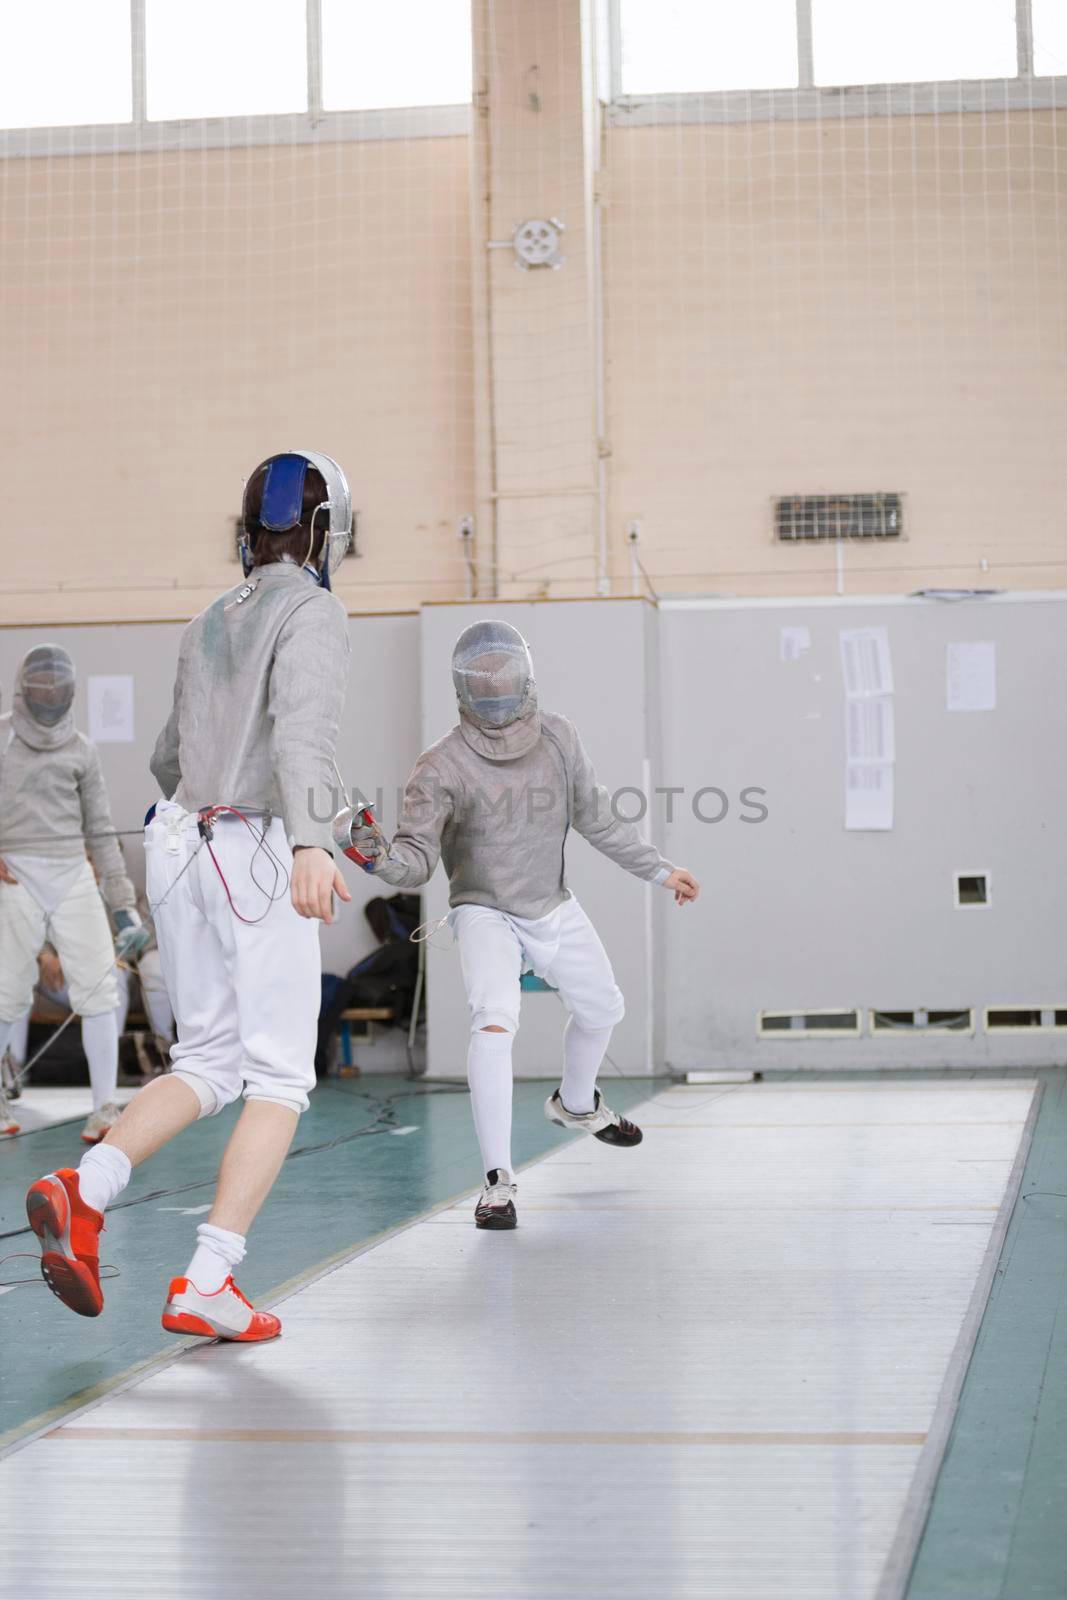 Young participants of the fencing tournament fighting in protective white clothes by Studia72